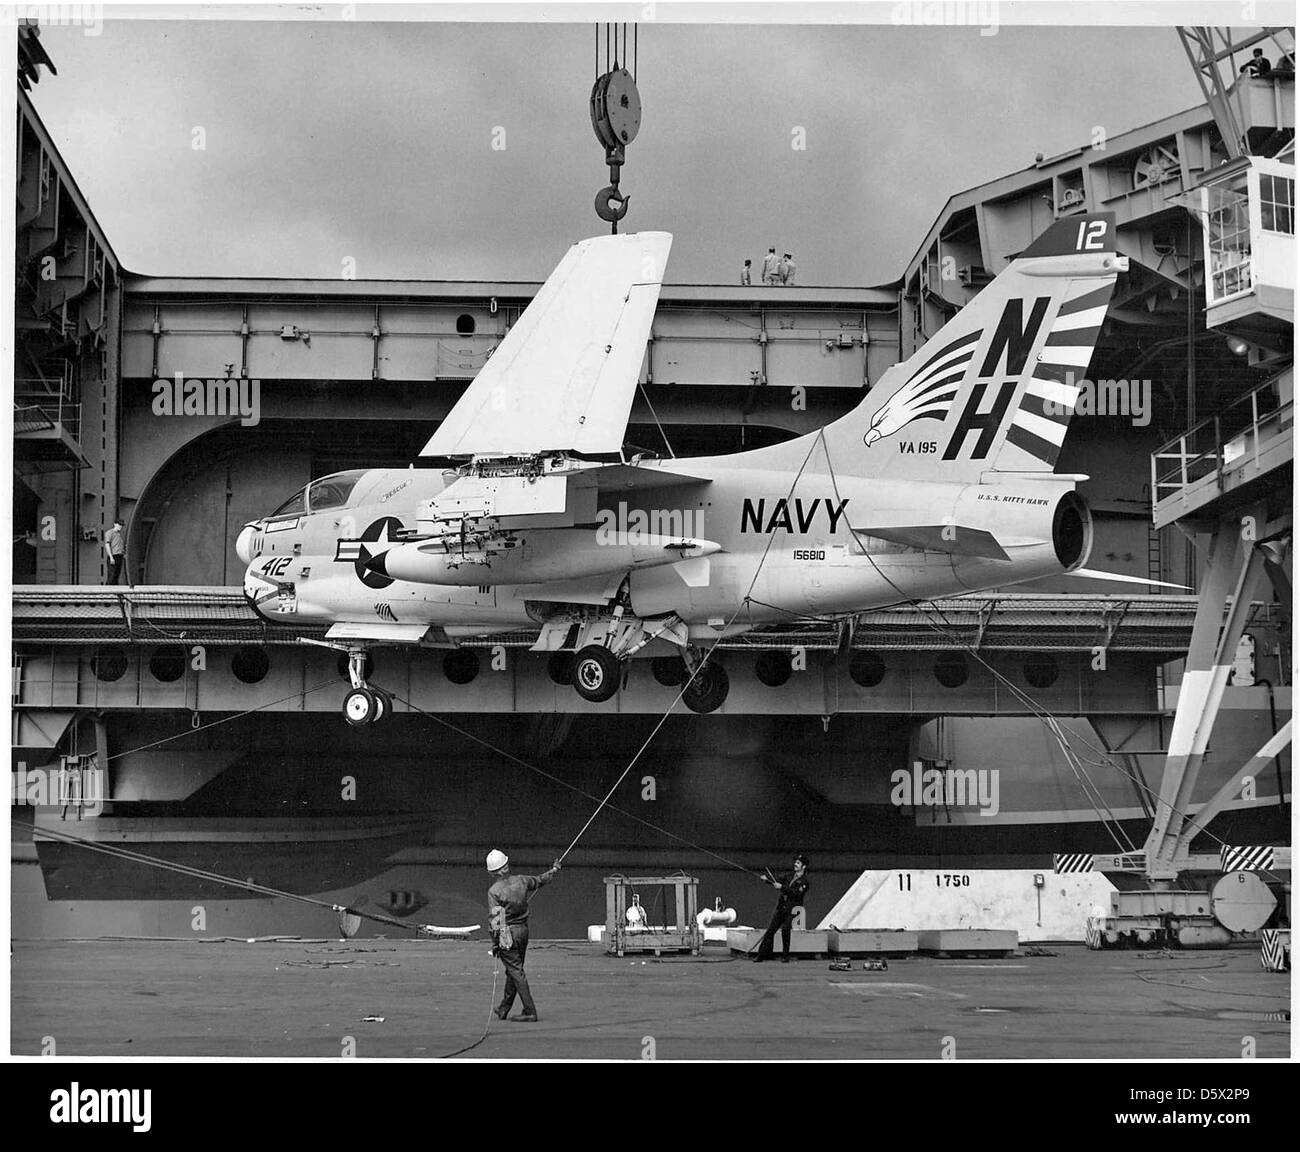 LTV A-7E 'Corsair II' of Attack Squadron (VA) 195 is hoisted aboard the USS KITTY HAWK (CV-63) at NAS North Island. Stock Photo